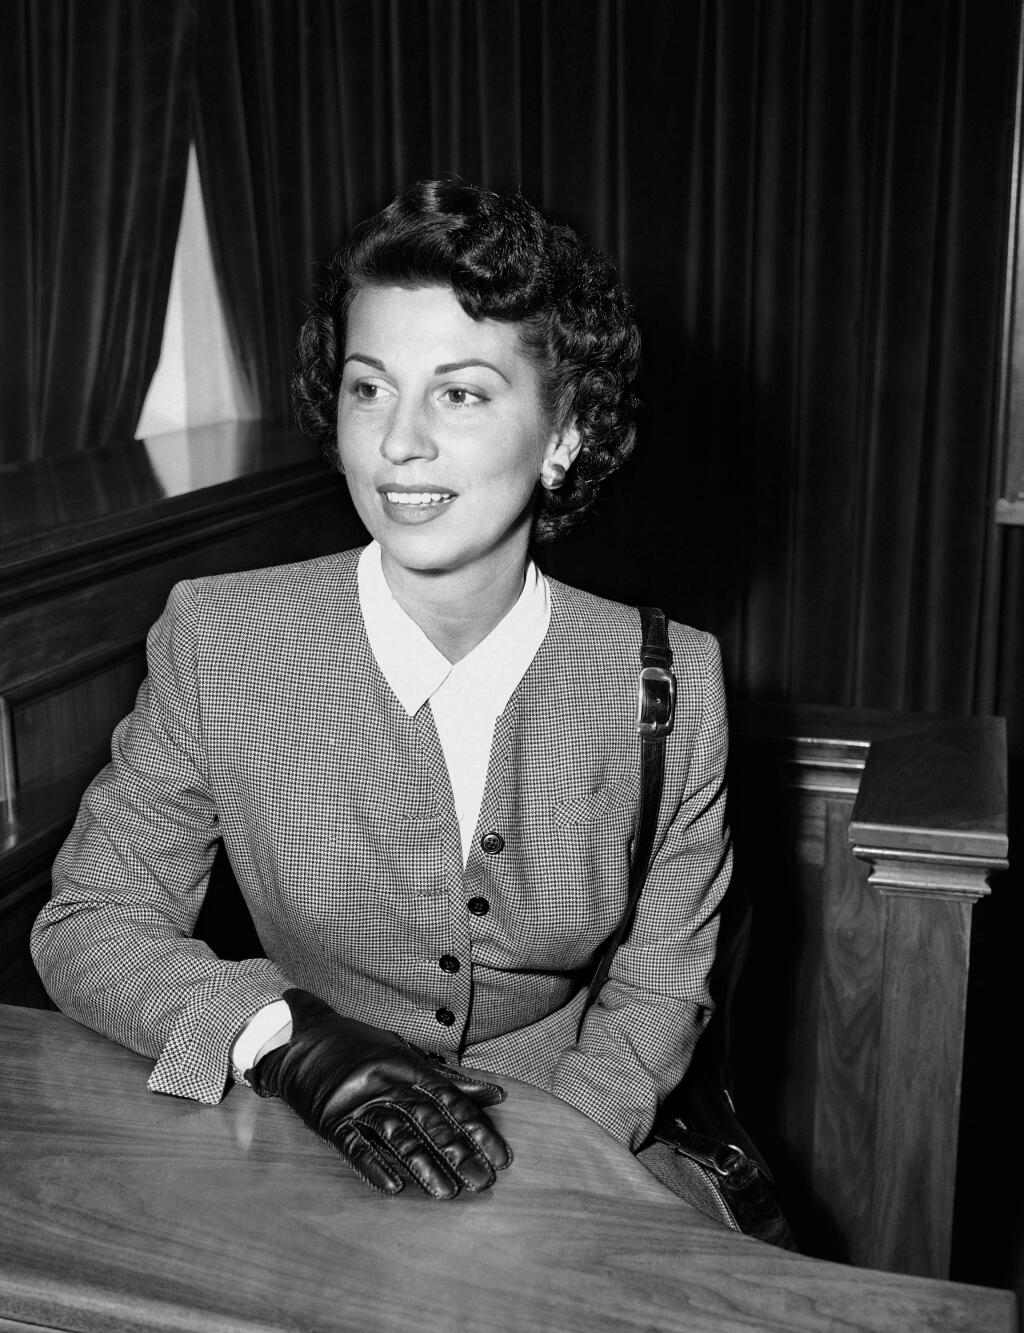 FILE - In this Sept. 28, 1950 file photo, Nancy Sinatra Sr. takes the witness stand in Superior Court in Santa Monica, Calif., where she was granted a decree of separate maintenance from singer Frank Sinatra. Sinatra Sr., the childhood sweetheart of Frank Sinatra who became the first of his four wives and the mother of his three children, has died. She was 101. Her daughter, Nancy Sinatra Jr., tweeted that her mother died Friday, July 13, 2018. (AP Photo/Harold Filan, File)